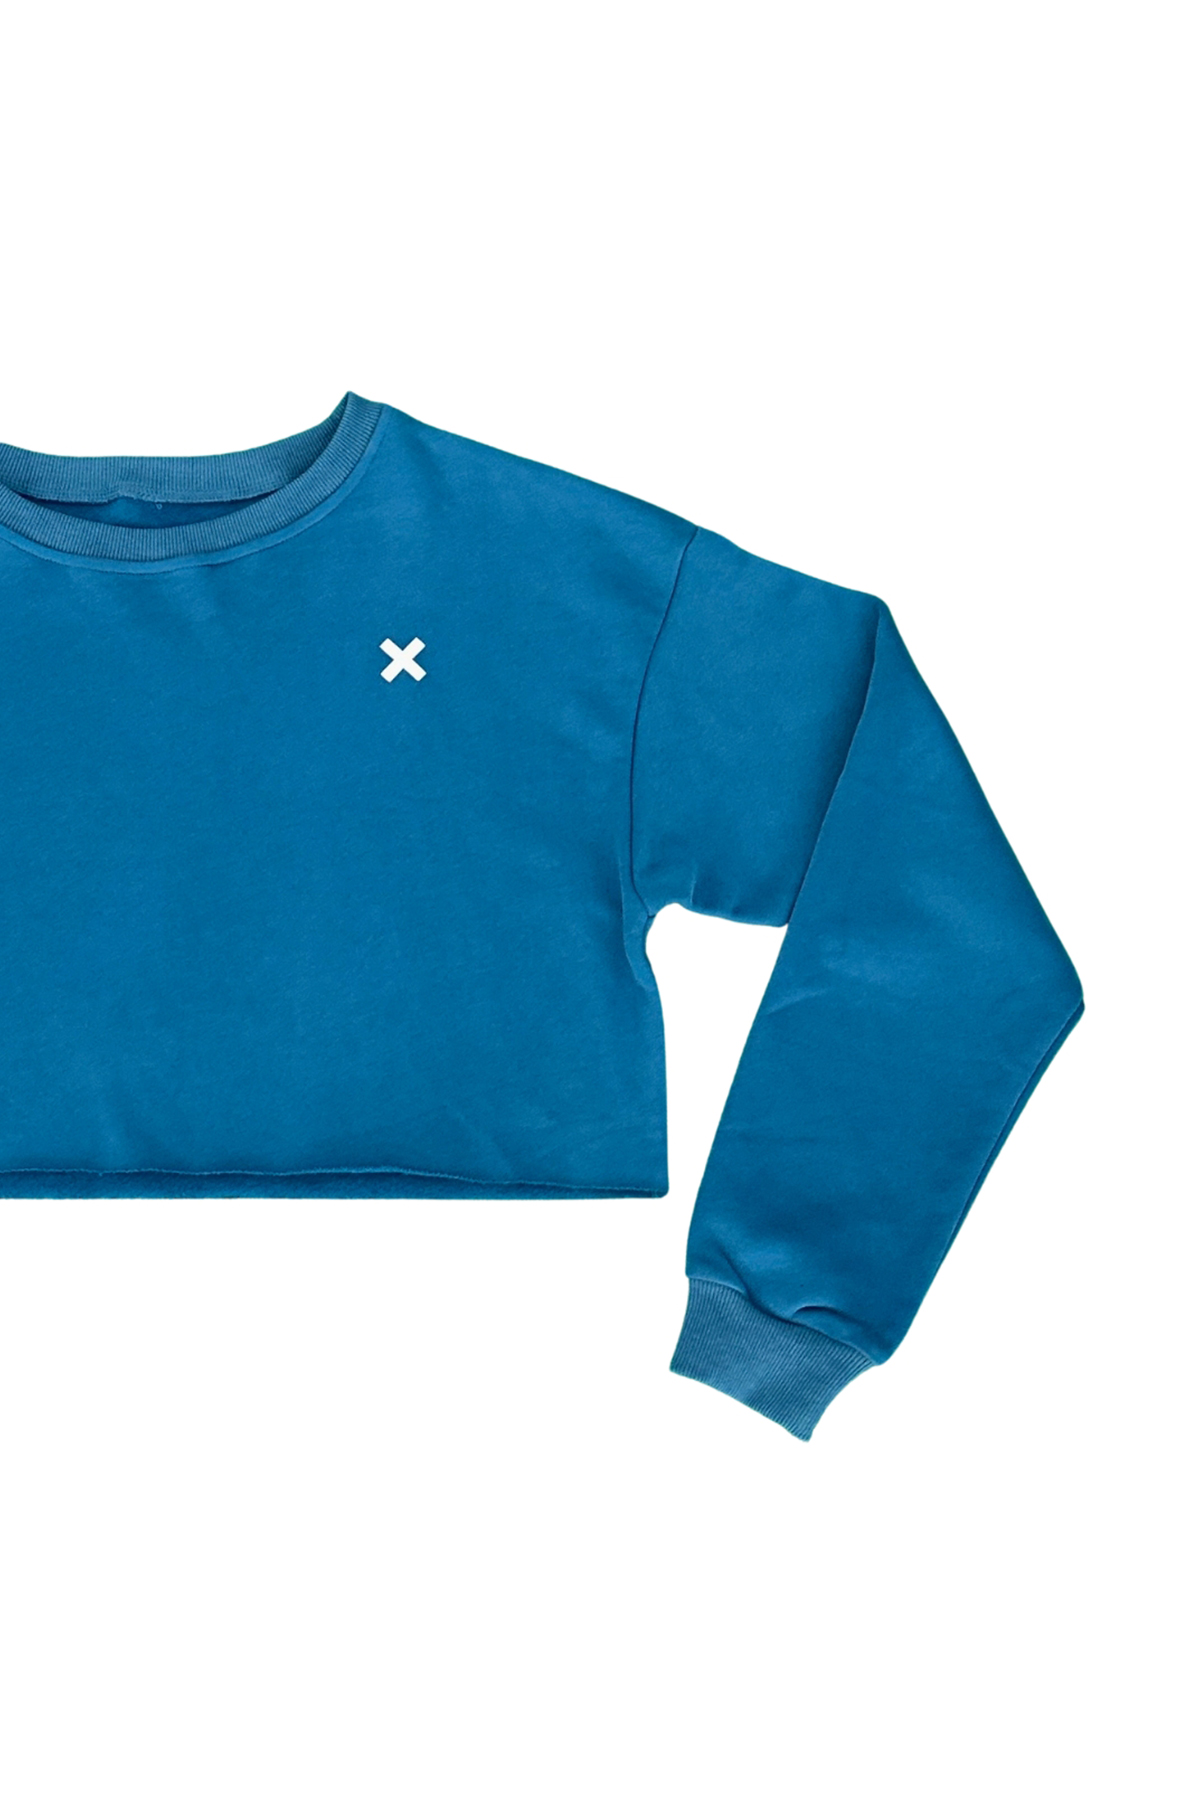 Time-Out-X-Cropped-Workout-Sweatshirt-blue-front-half